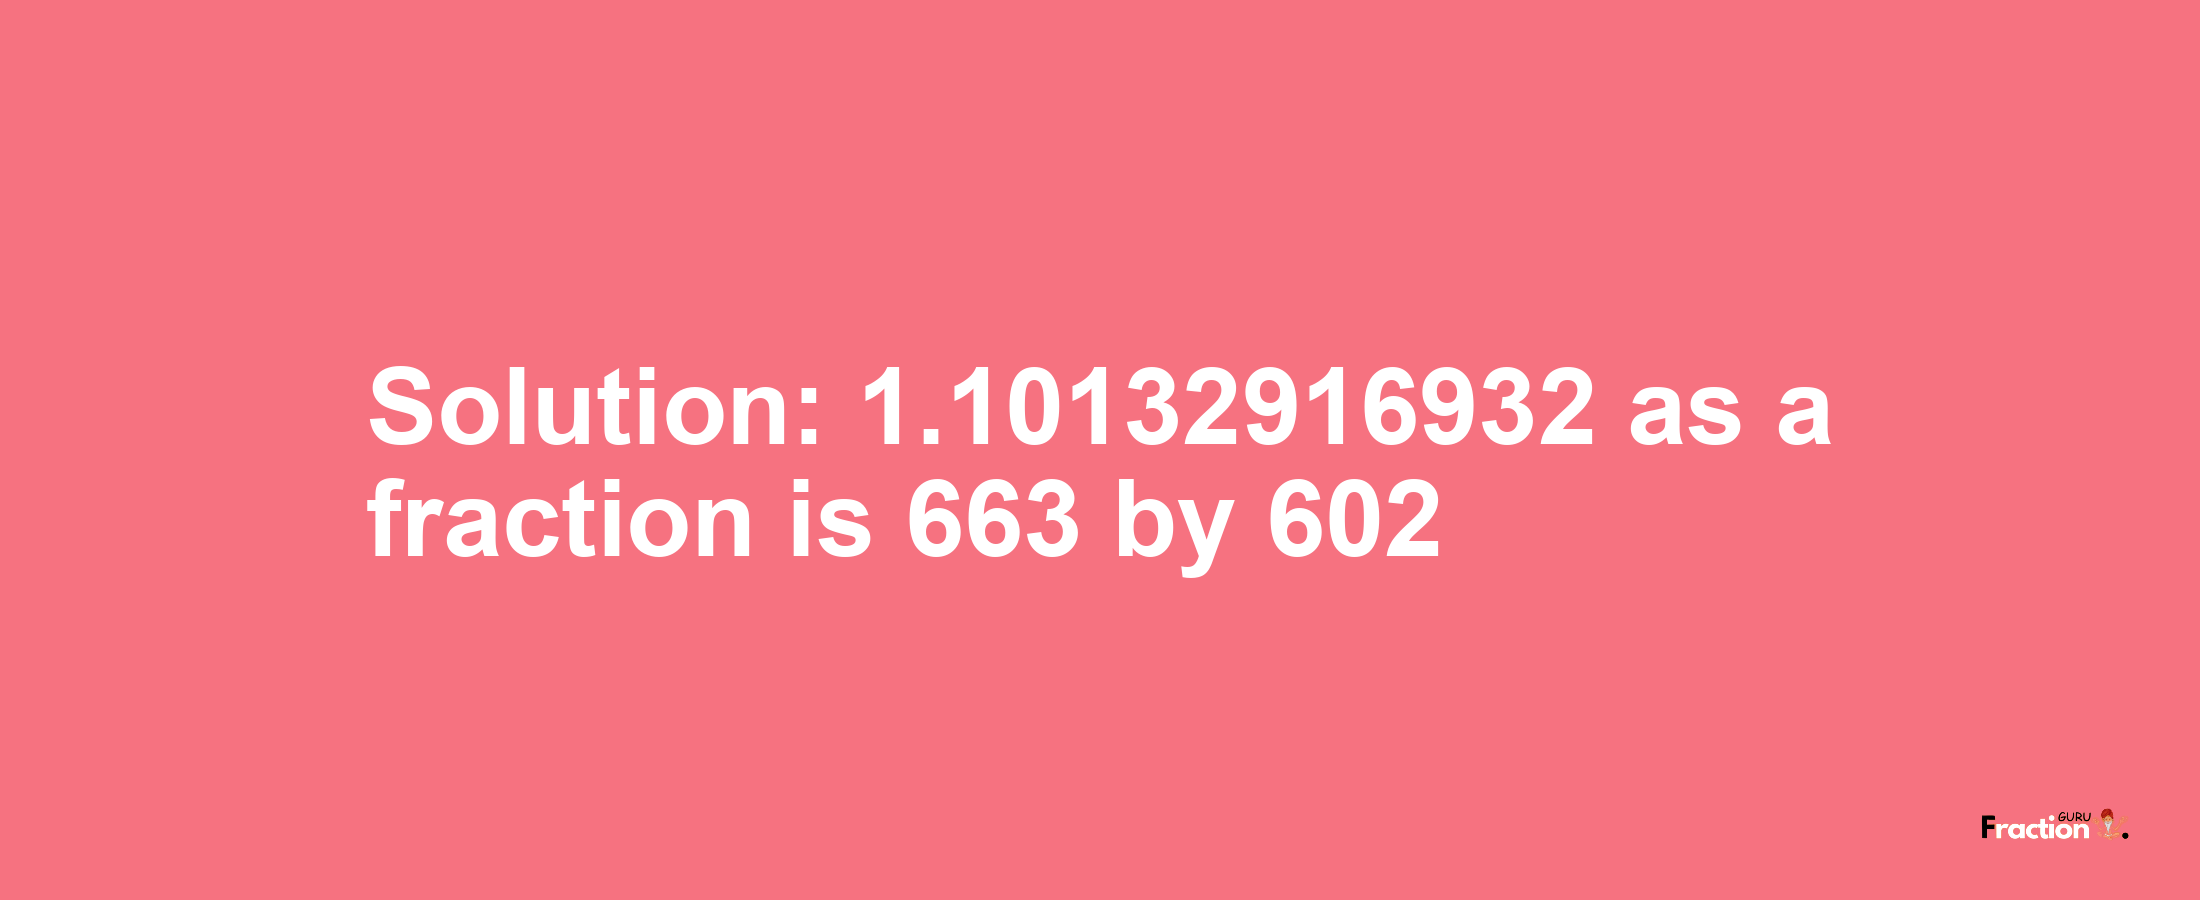 Solution:1.10132916932 as a fraction is 663/602